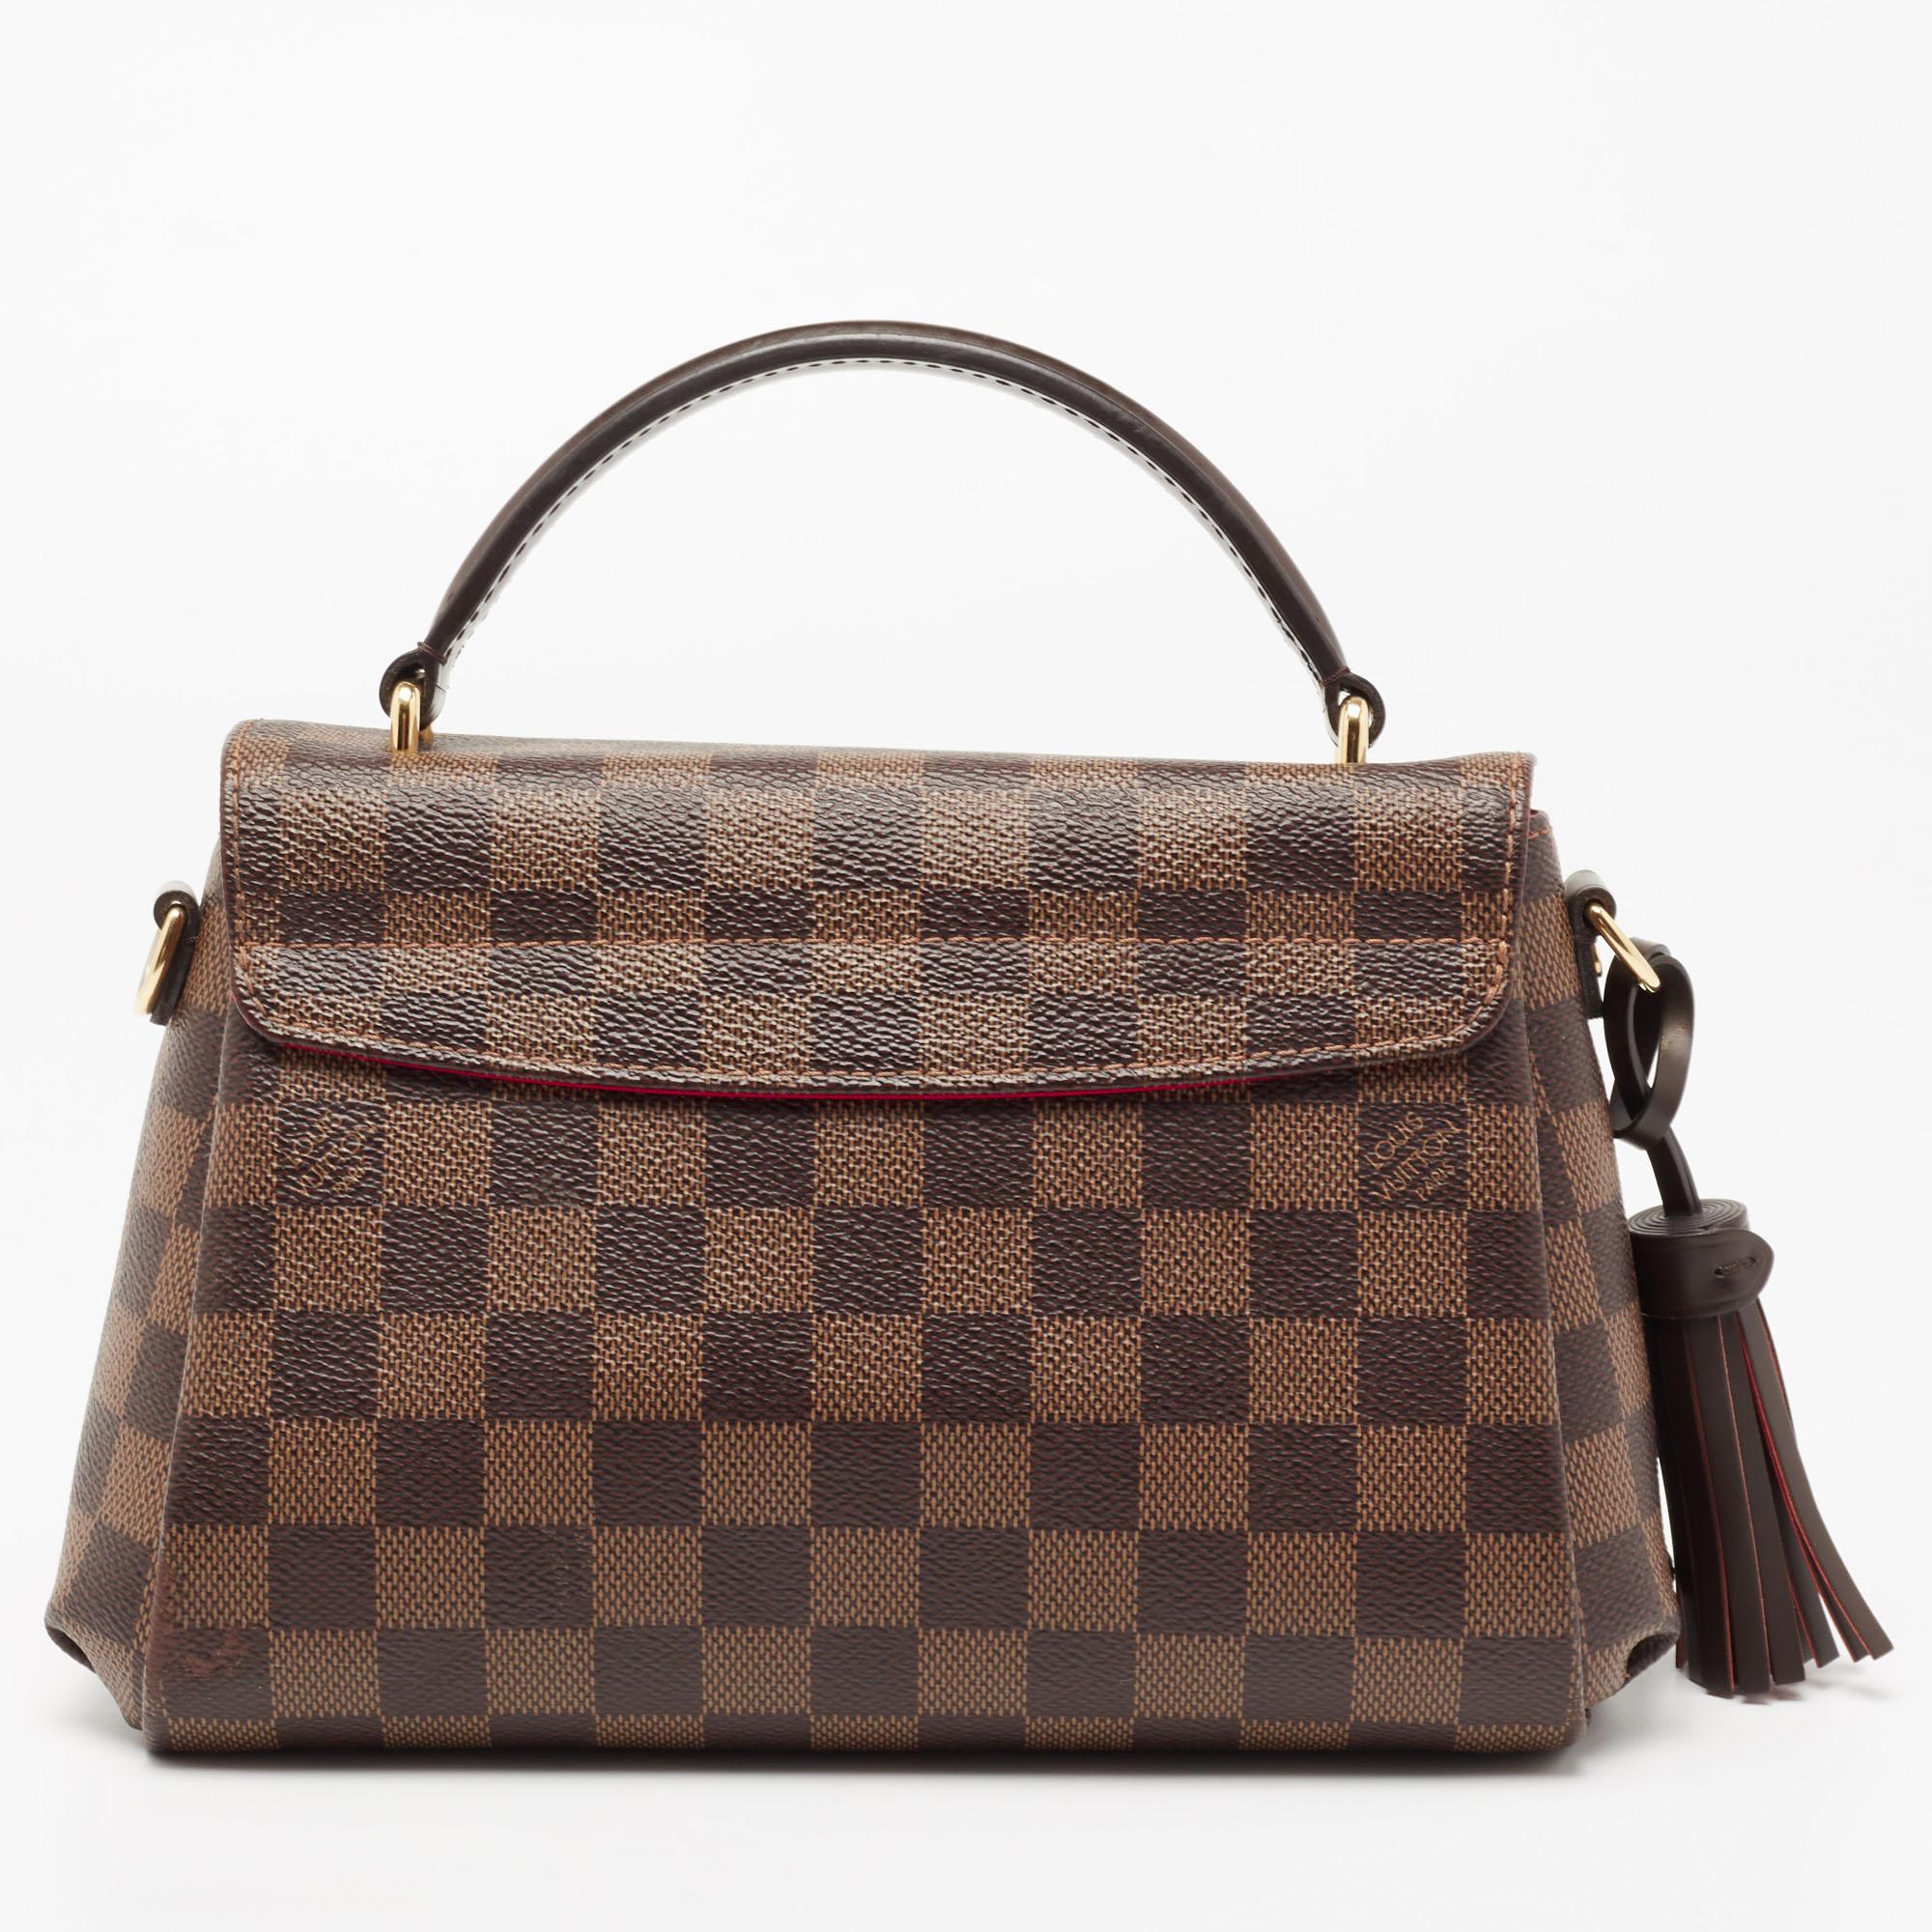 Treat yourself to this Croisette bag by Louis Vuitton. This structured style is crafted from signature Damier Ebene canvas. It is detailed with a gold-tone lock, a top handle, and a slender shoulder strap for crossbody wear. The well-sized interior